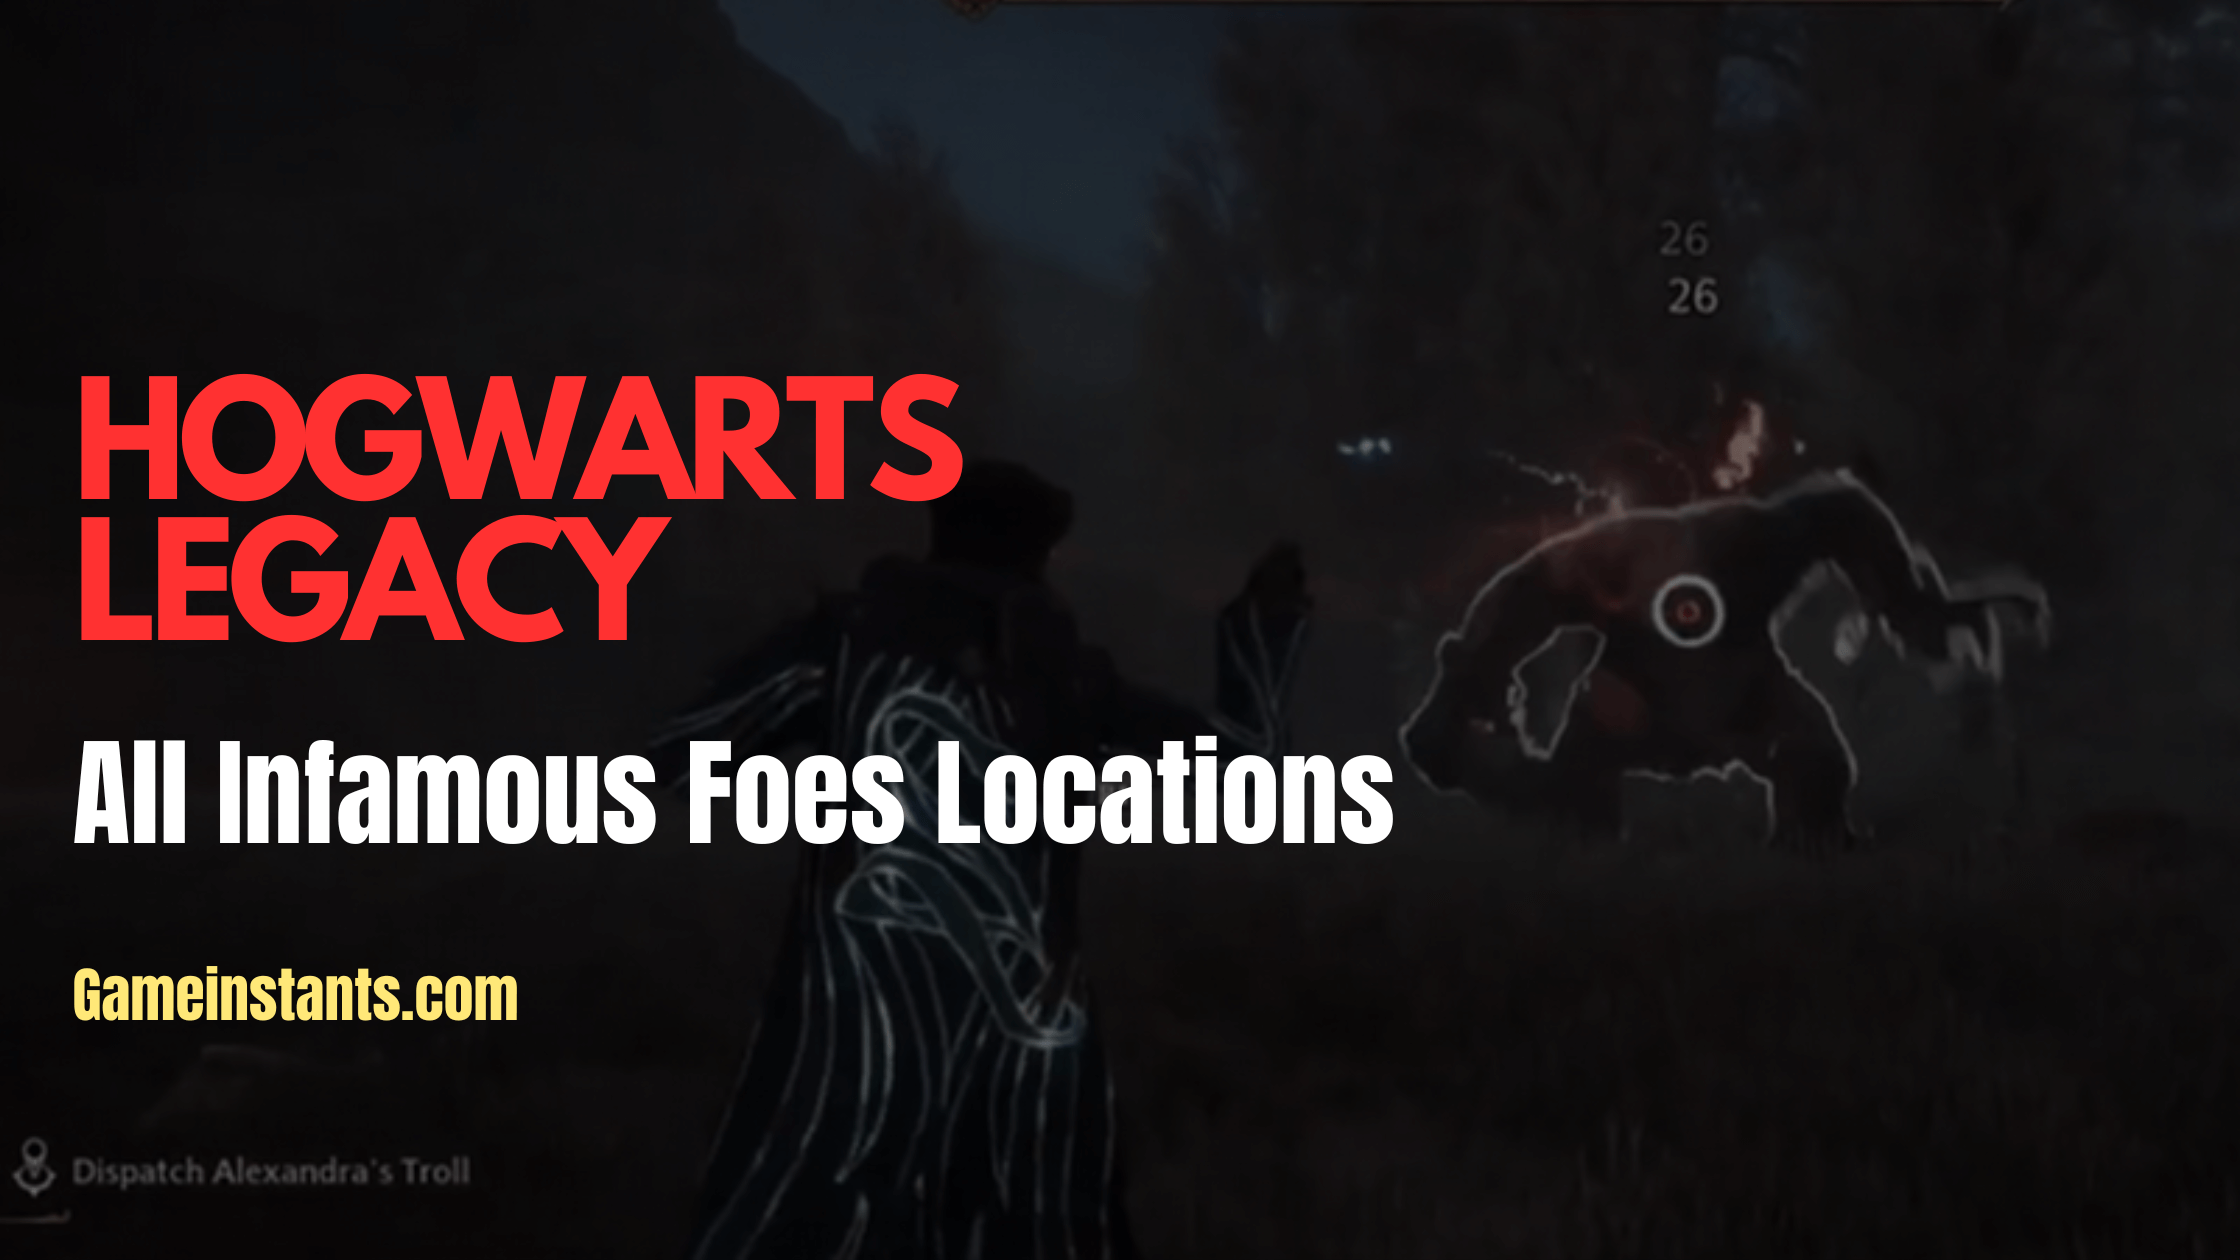 All Infamous Foes Locations in Hogwarts Legacy